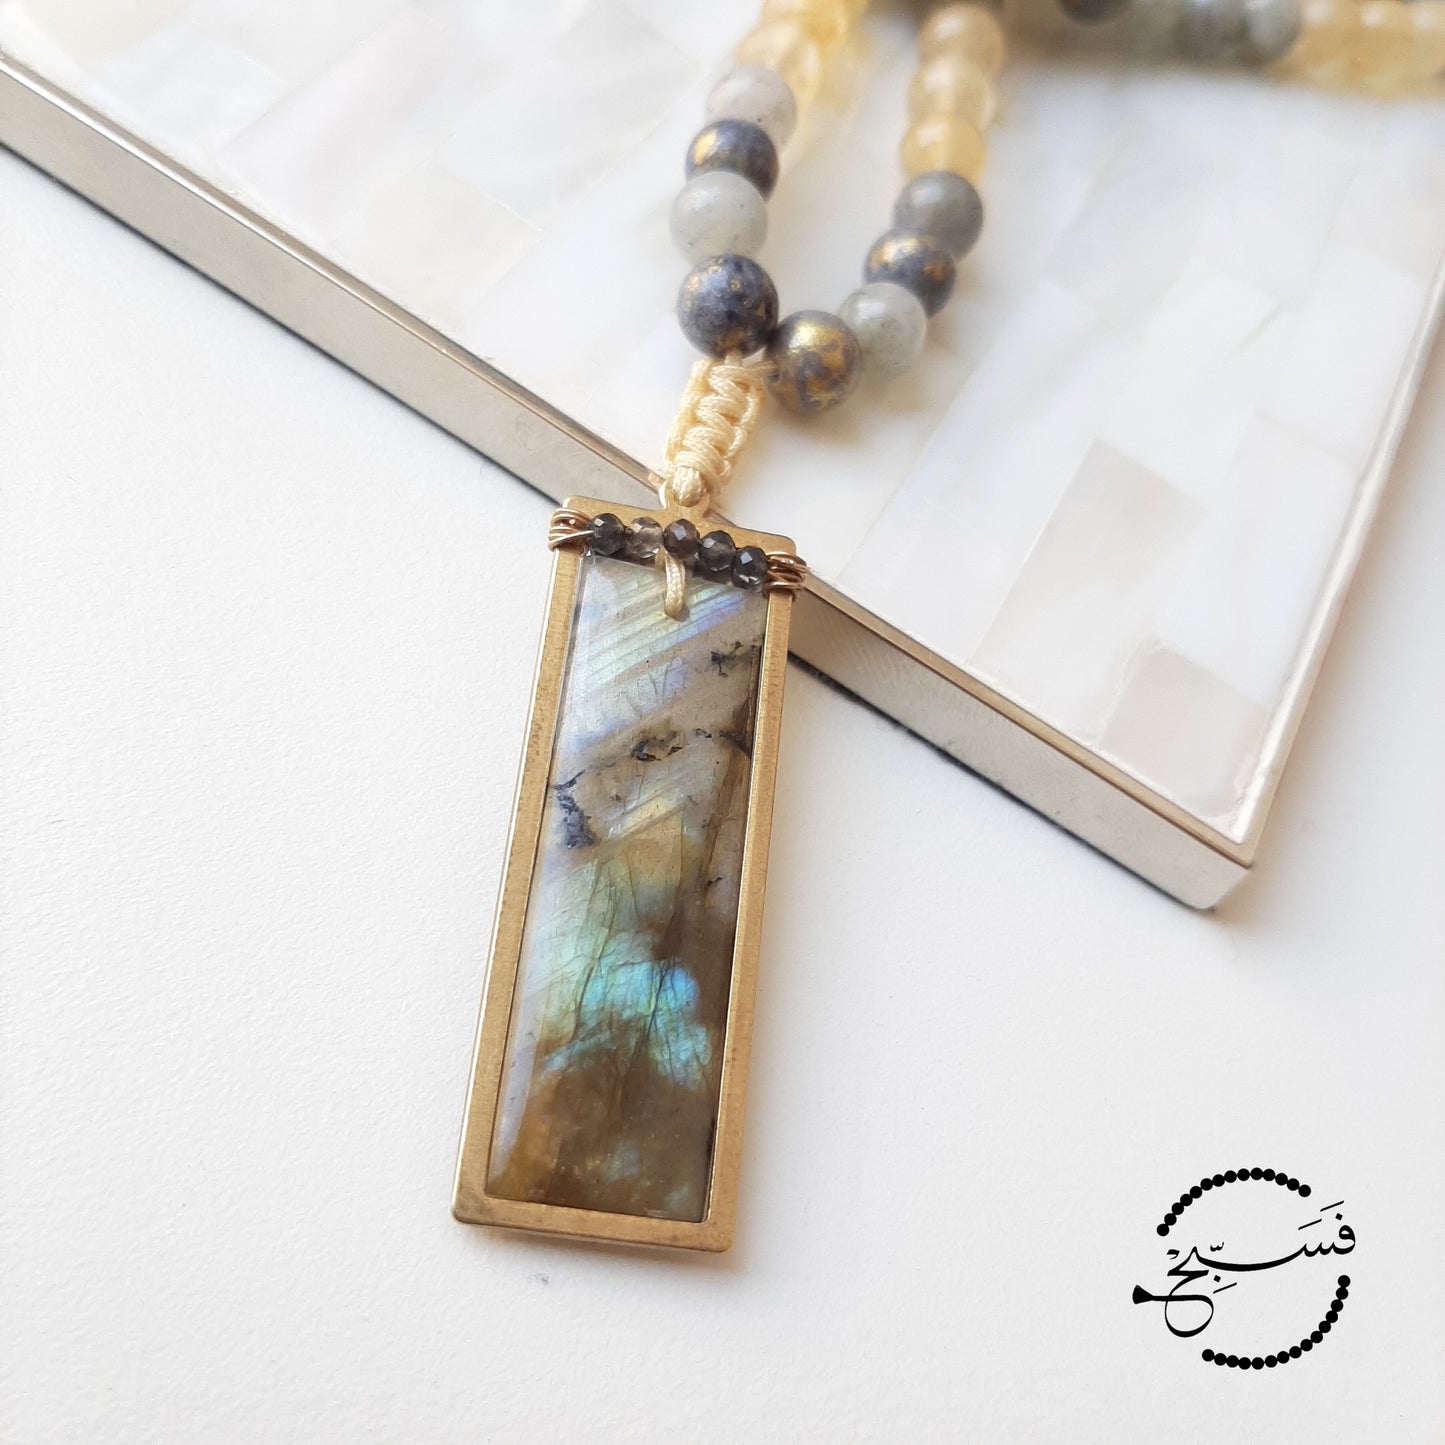 Absolutely stunning natural flash labradorite stone. This beauty glimmers in the light ma sha Allah. Delicately handcrafted into a pendant with natural obsidian beads.  Labradorite and smoky quartz beads are used to match the pendant.  Packaged in a luxurious pouch and a gift box.  99 beads